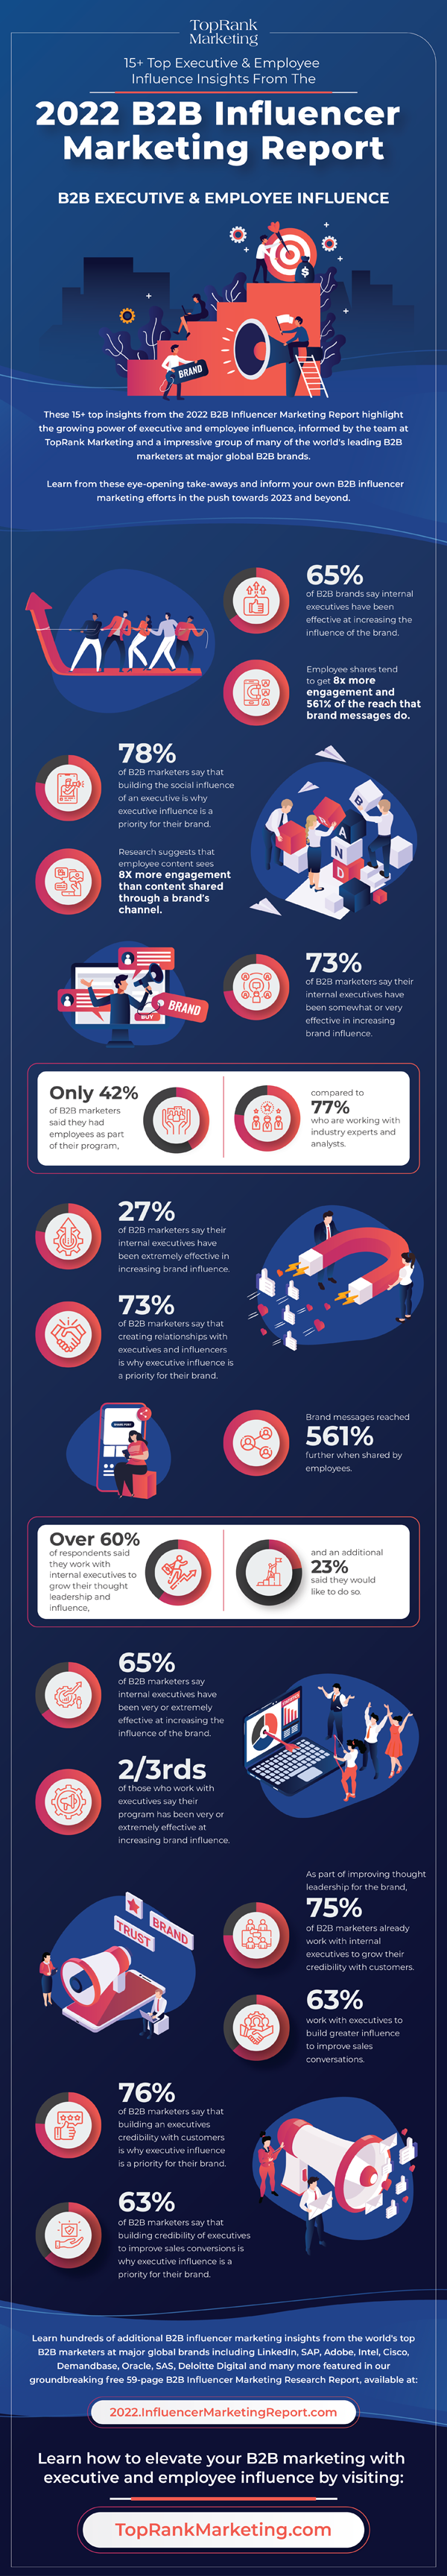 Infographic: 15+ Top Executive & Employee Influence Insights From The 2022 B2B Influencer Marketing Report